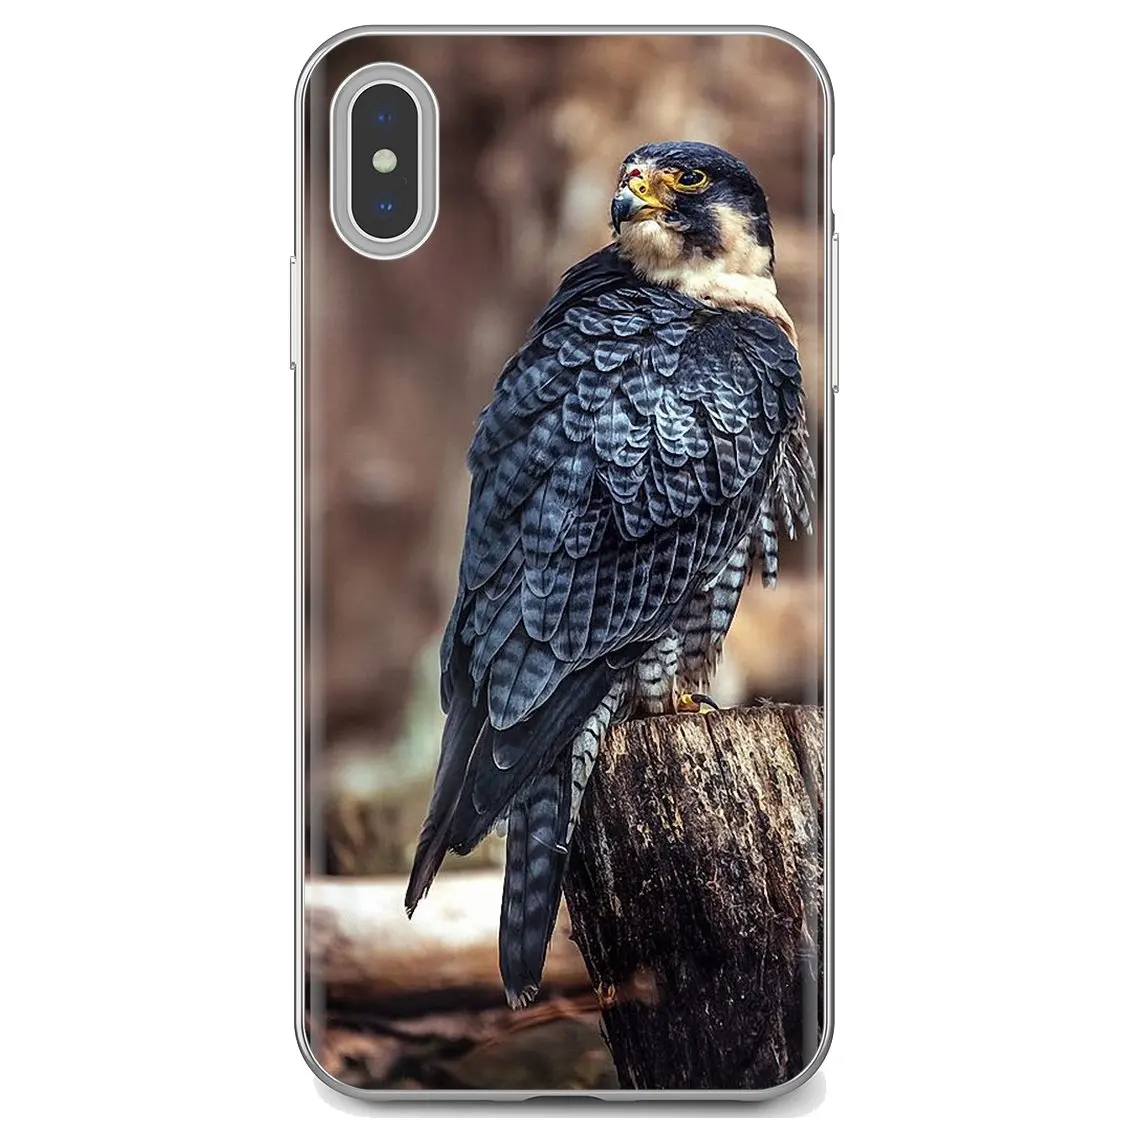 case for xiaomi For Huawei Y6 Y5 2019 For Xiaomi Redmi Note 4 5 6 7 8 Pro Mi A1 A2 A3 6X 5X 7A Peregrine Falcon fastest animal Birds Soft Cover xiaomi leather case case Cases For Xiaomi